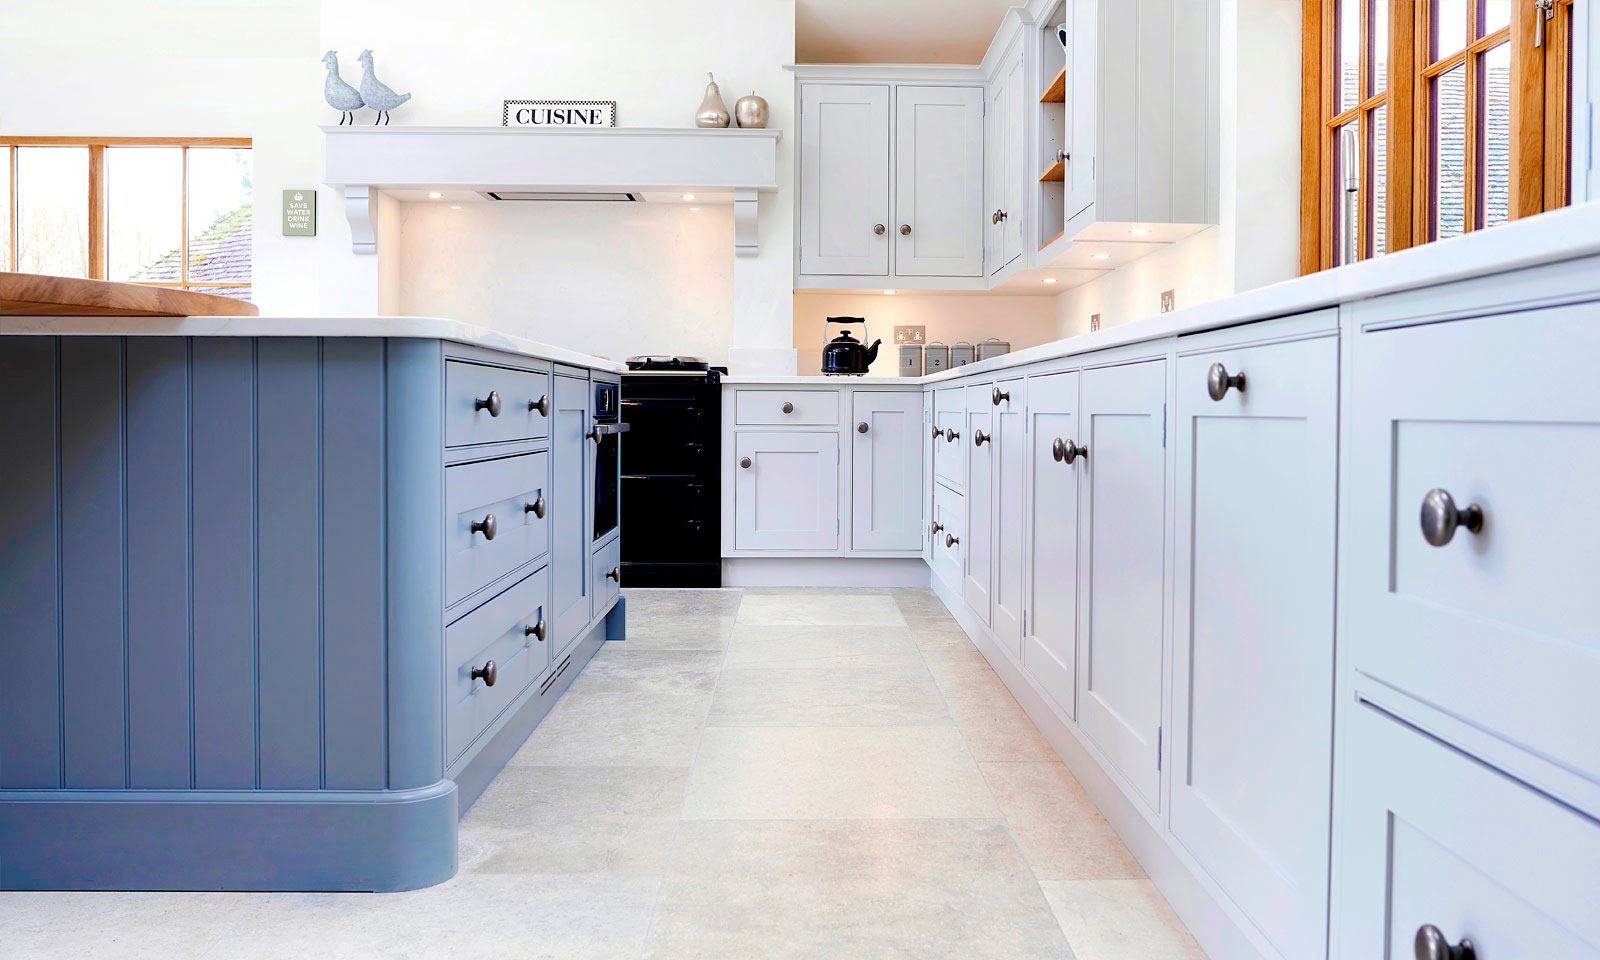 Biddenden. A classic handmade, hand-painted, Shaker style kitchen, installed in a large historic country villa. A bespoke hand-crafted kitchen manufactured by the skilled cabinet makers at Mounts Hill Woodcraft.